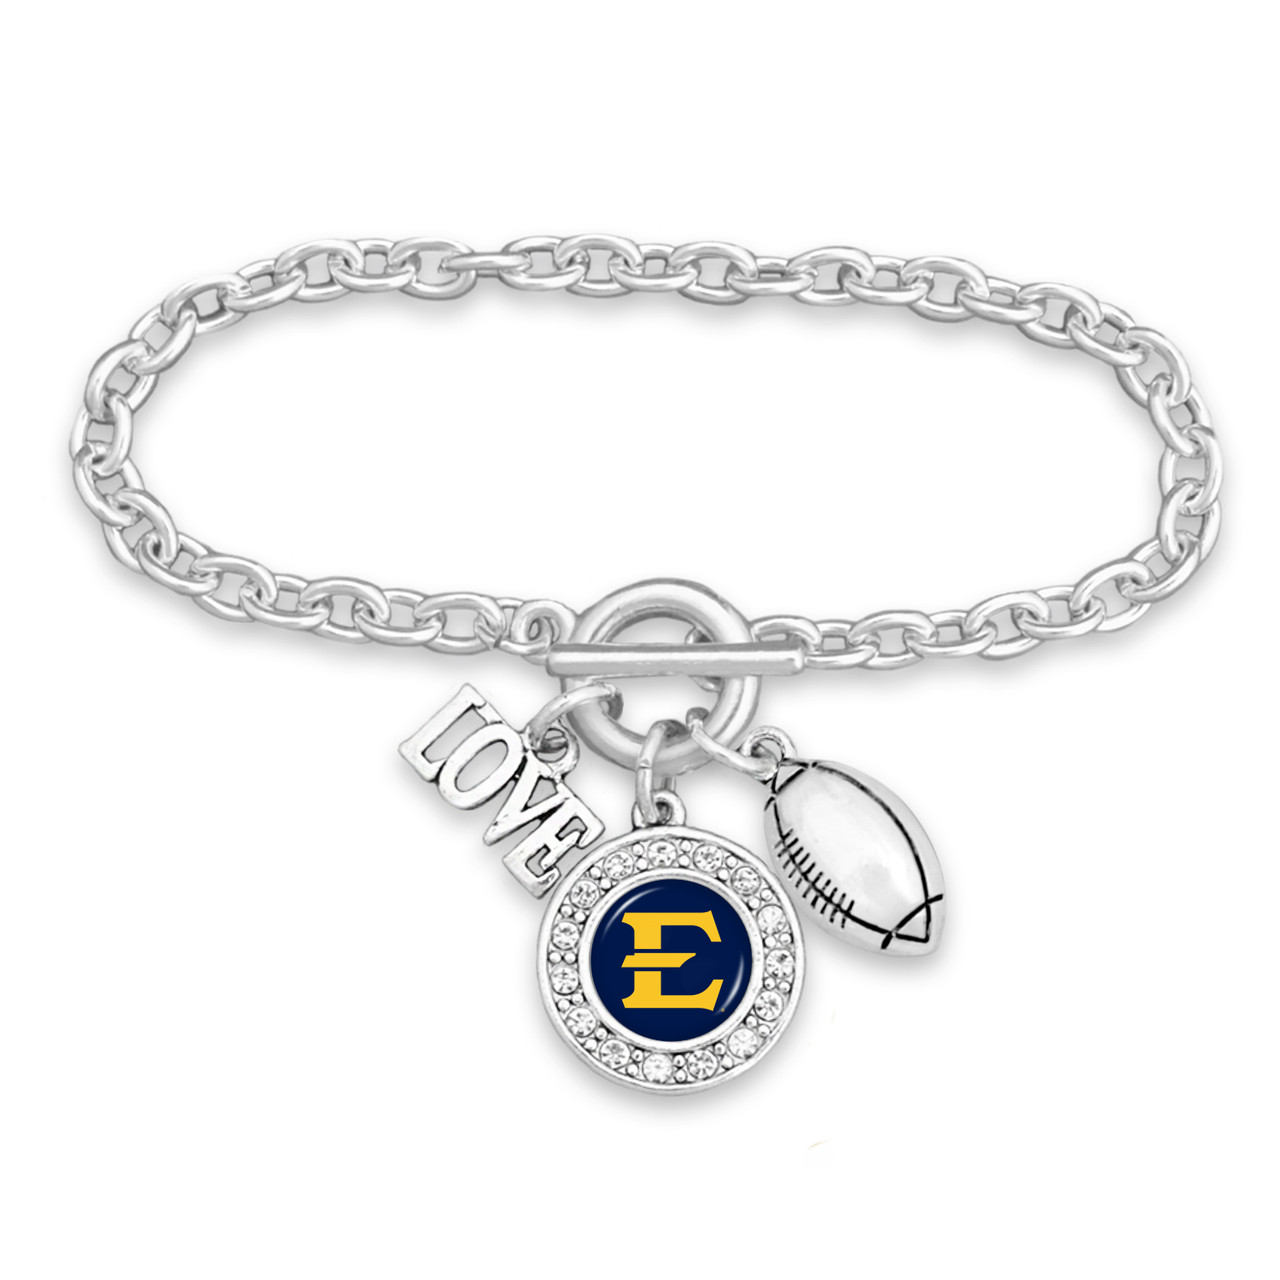 East Tennessee State Buccaneers Toggle Bracelet- Football, Love and Logo